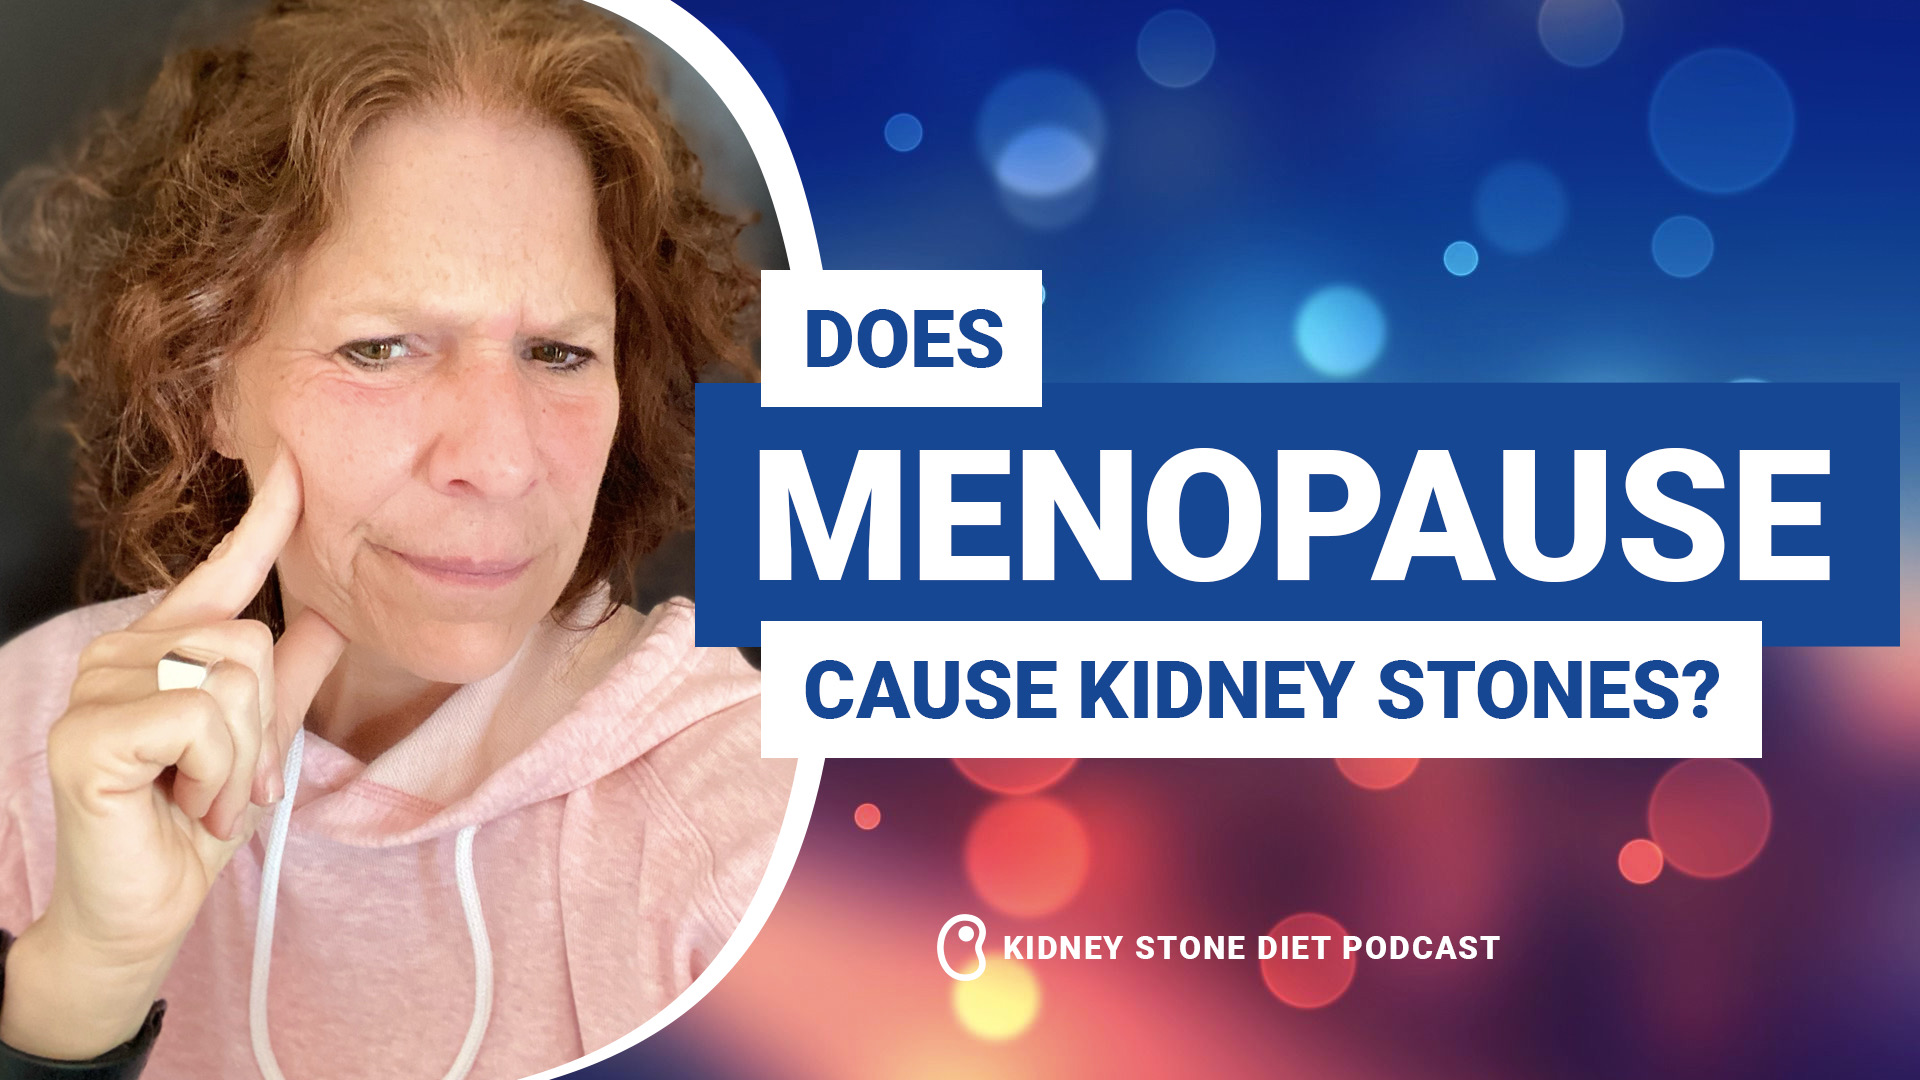 Does menopause cause kidney stones?